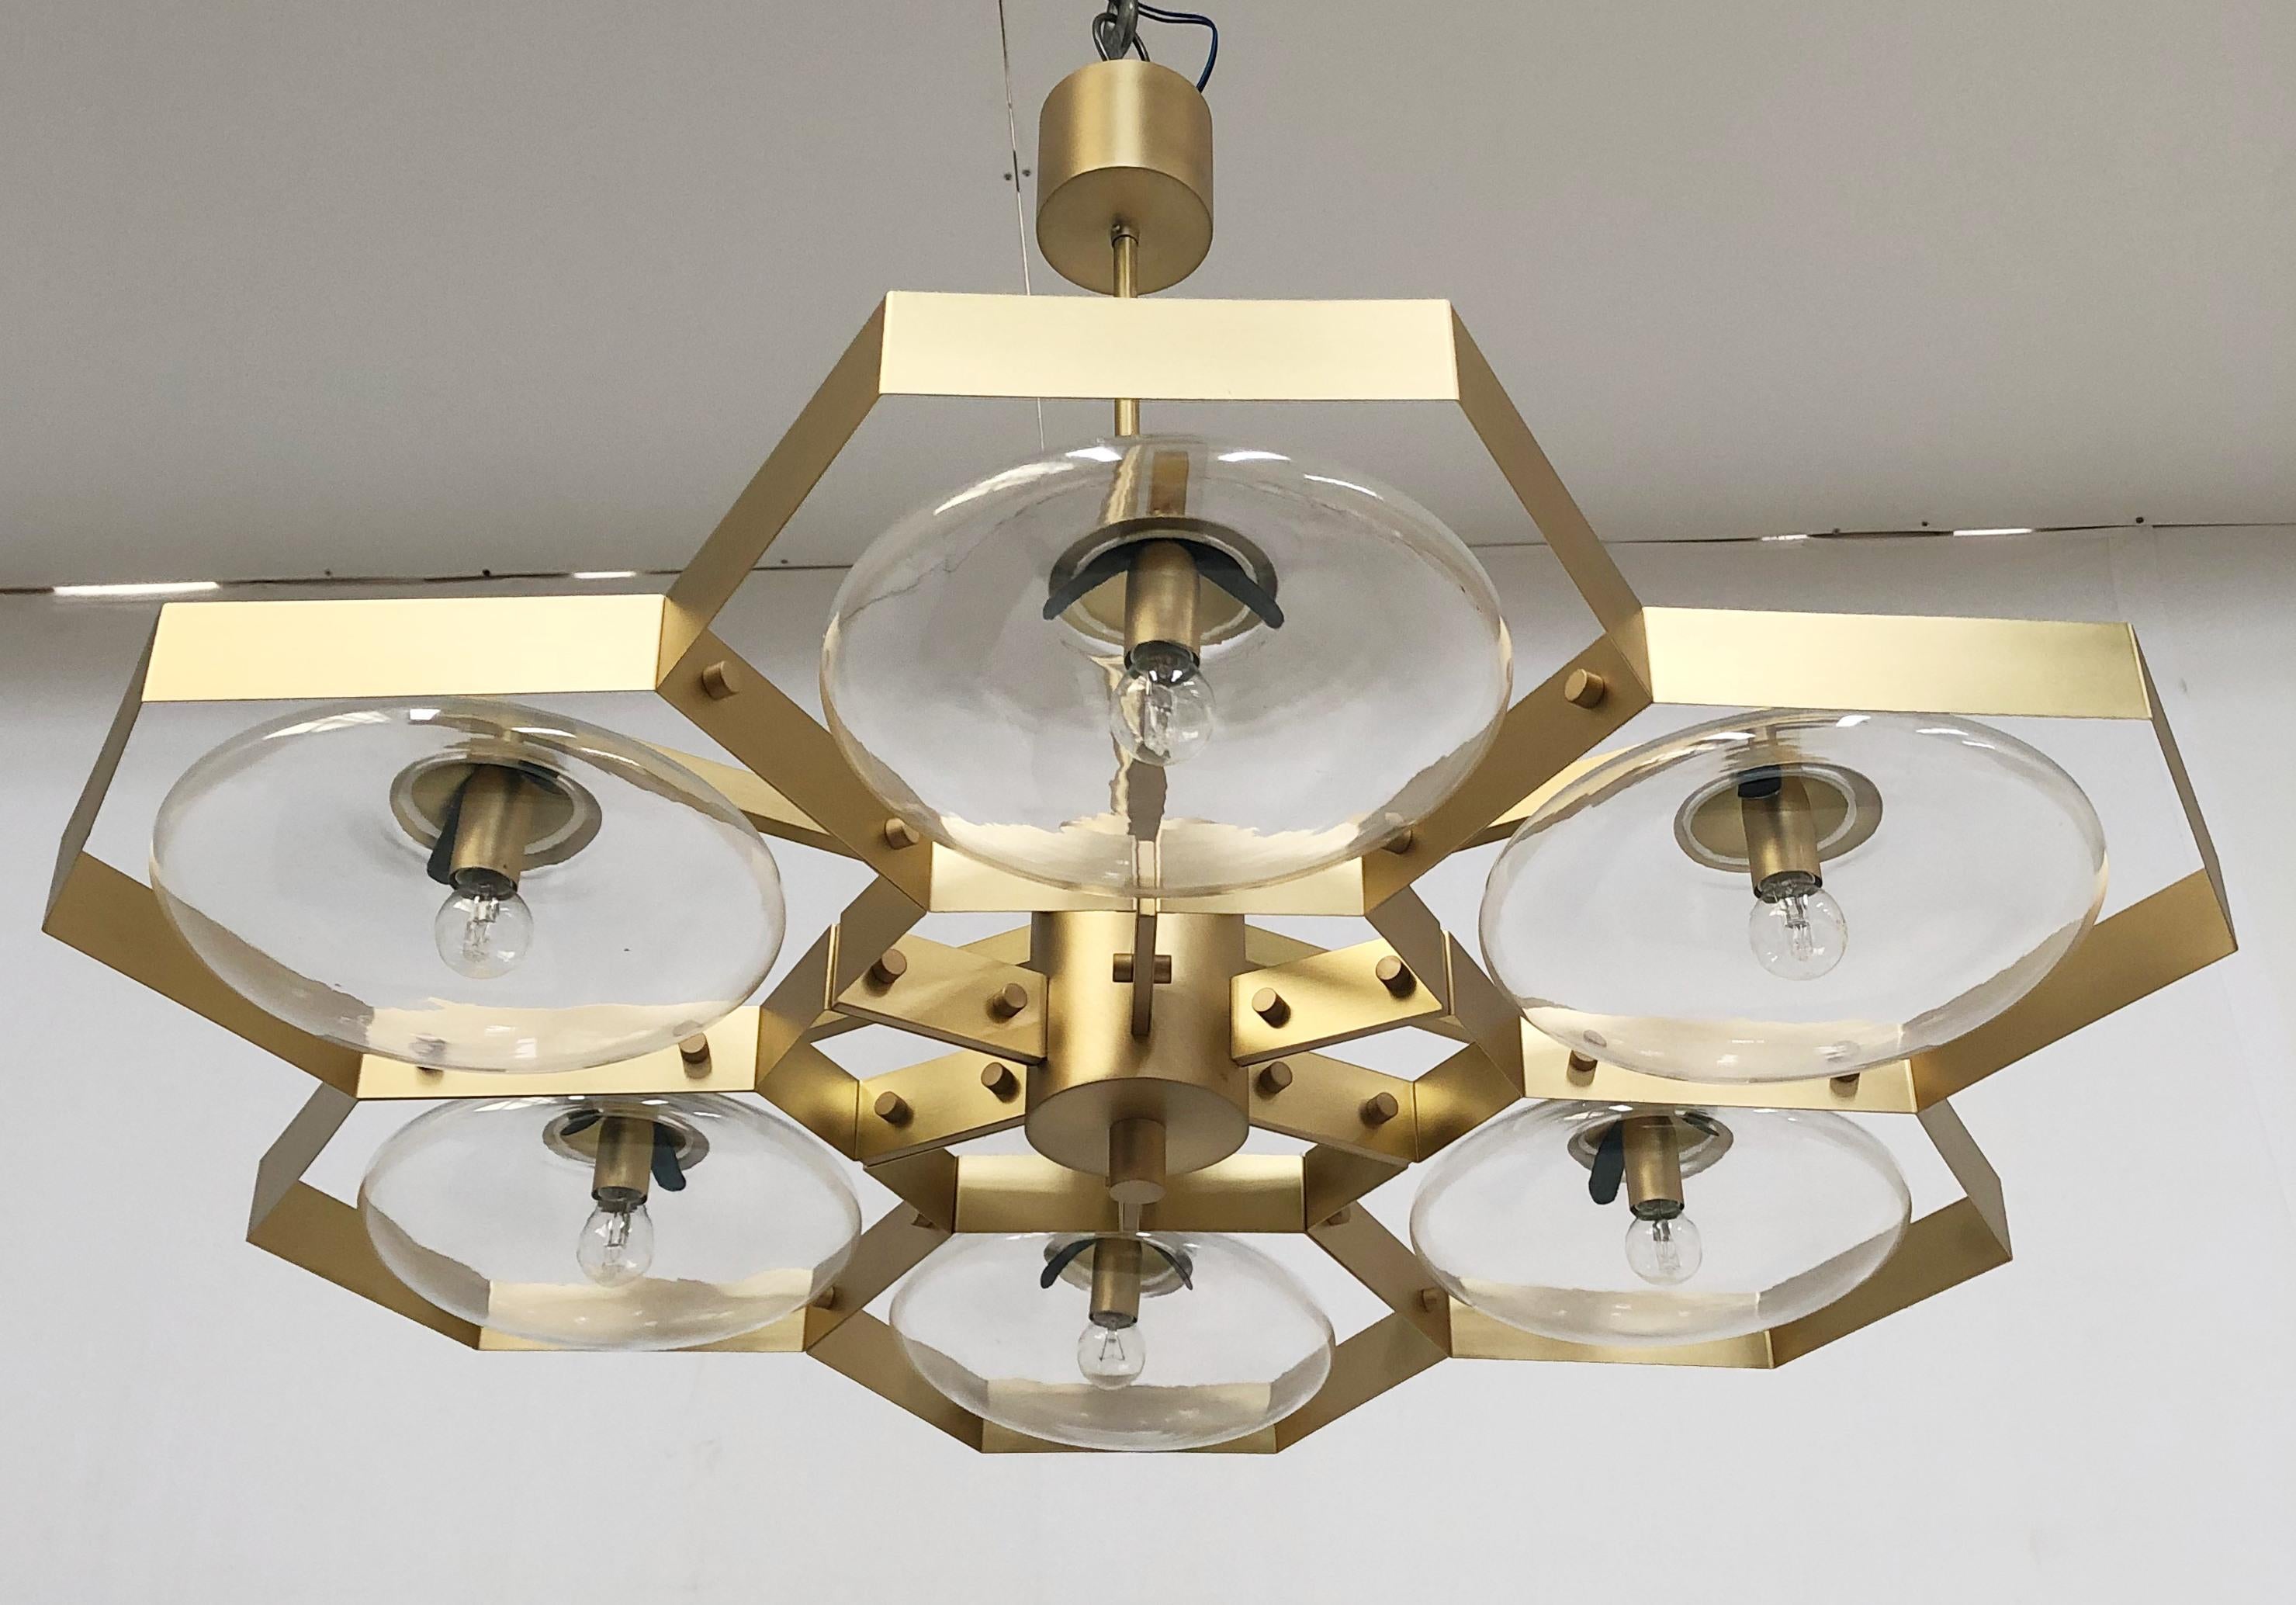 Italian chandelier with Murano glass shades mounted on solid brass frame / Made in Italy
Designed by Fabio Ltd, inspired by Angelo Lelli and Arredoluce styles
6 lights / E12 or E14 / max 40W each
Measures: Diameter 43 inches, height 30 inches
Order